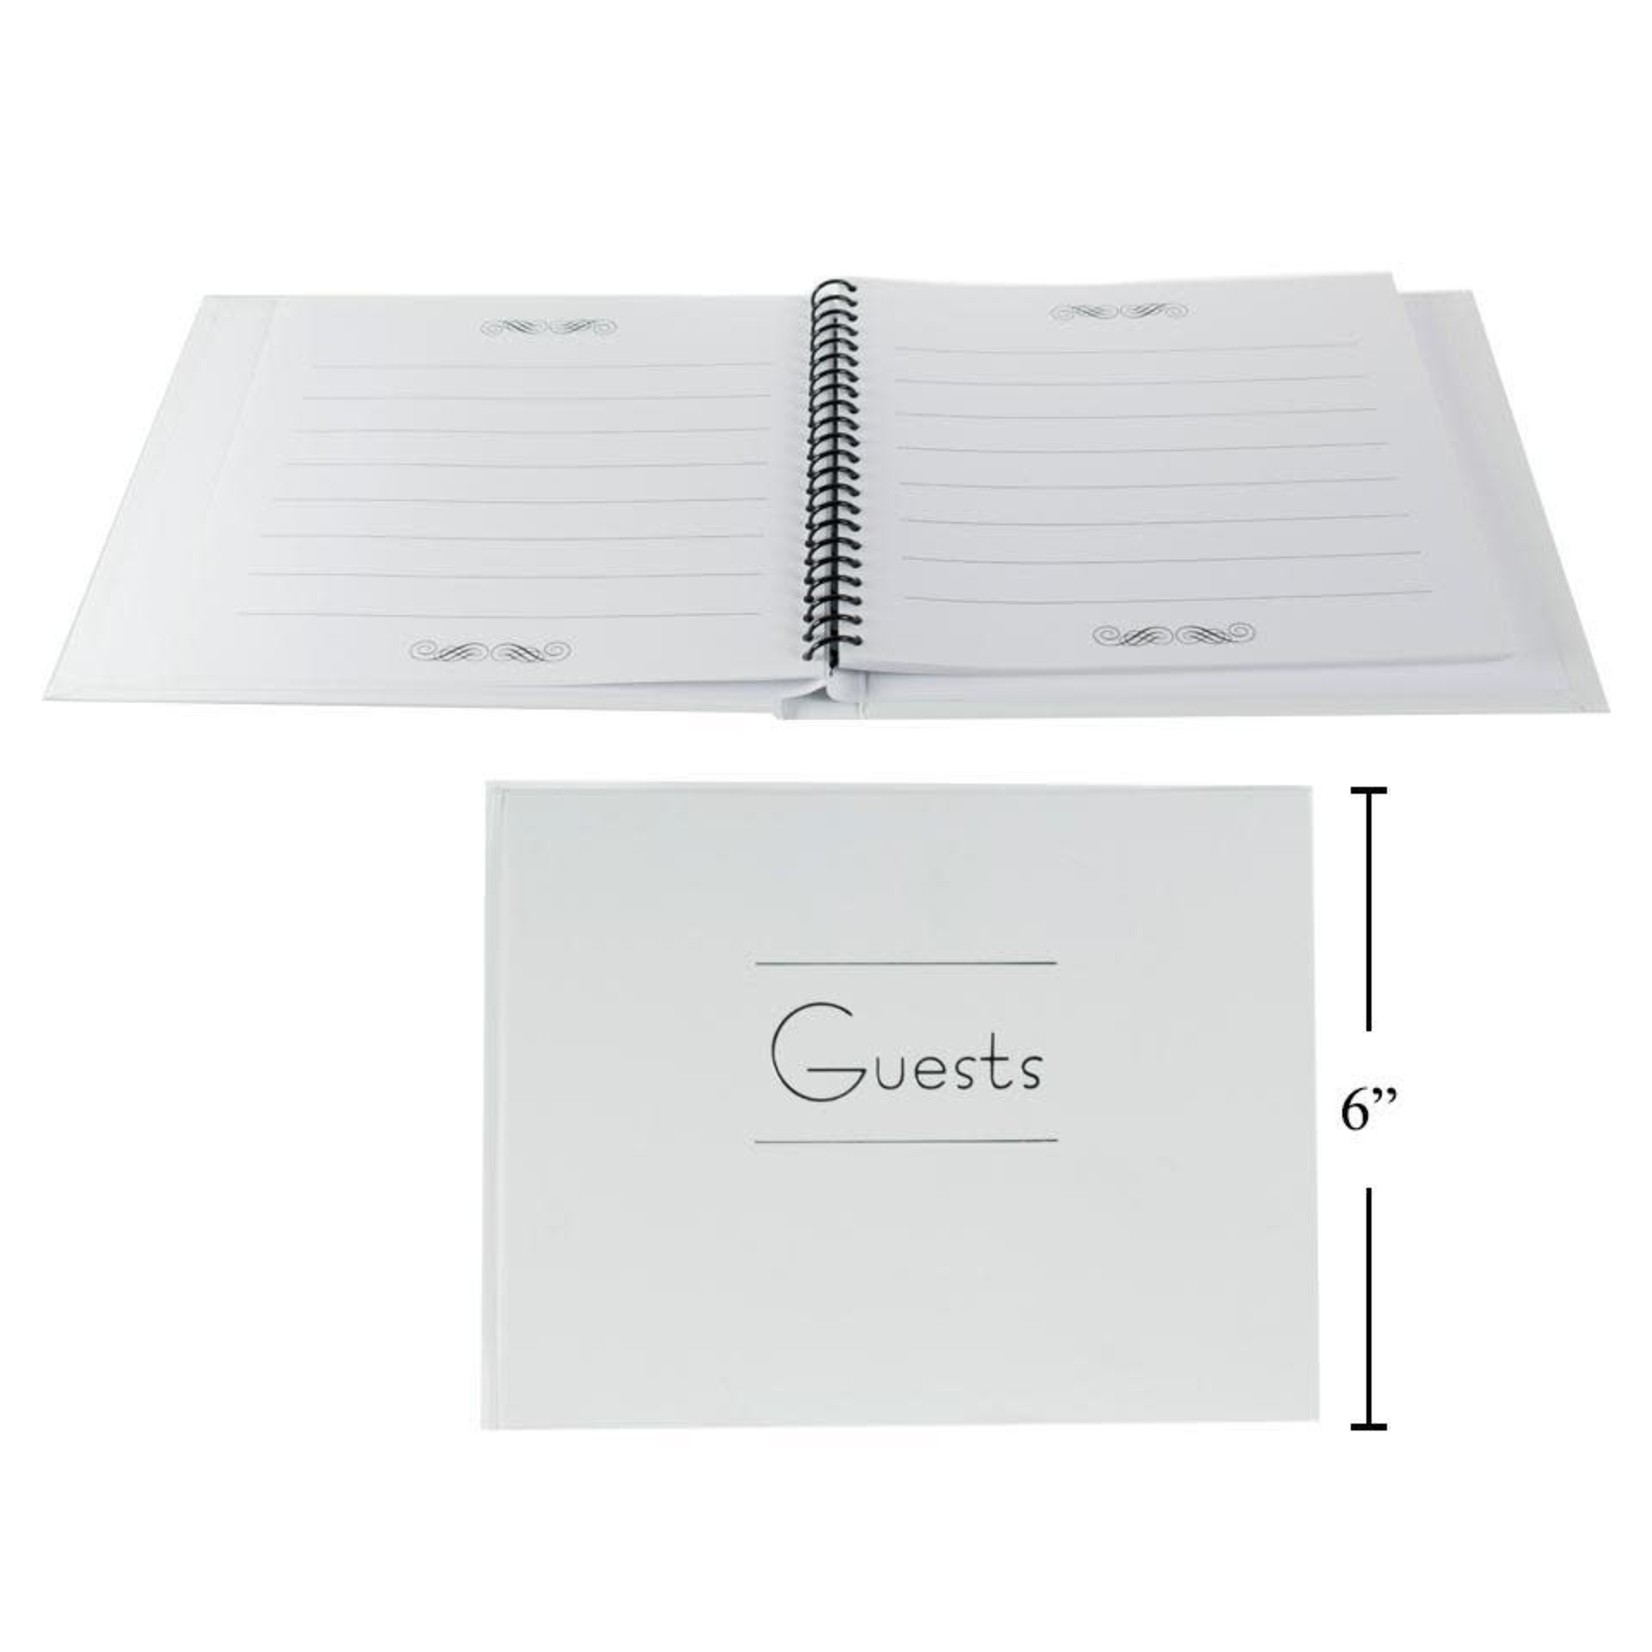 7.5IN X 5-7/8IN WEDDING GUEST BOOK, HARD COVER, WHITE